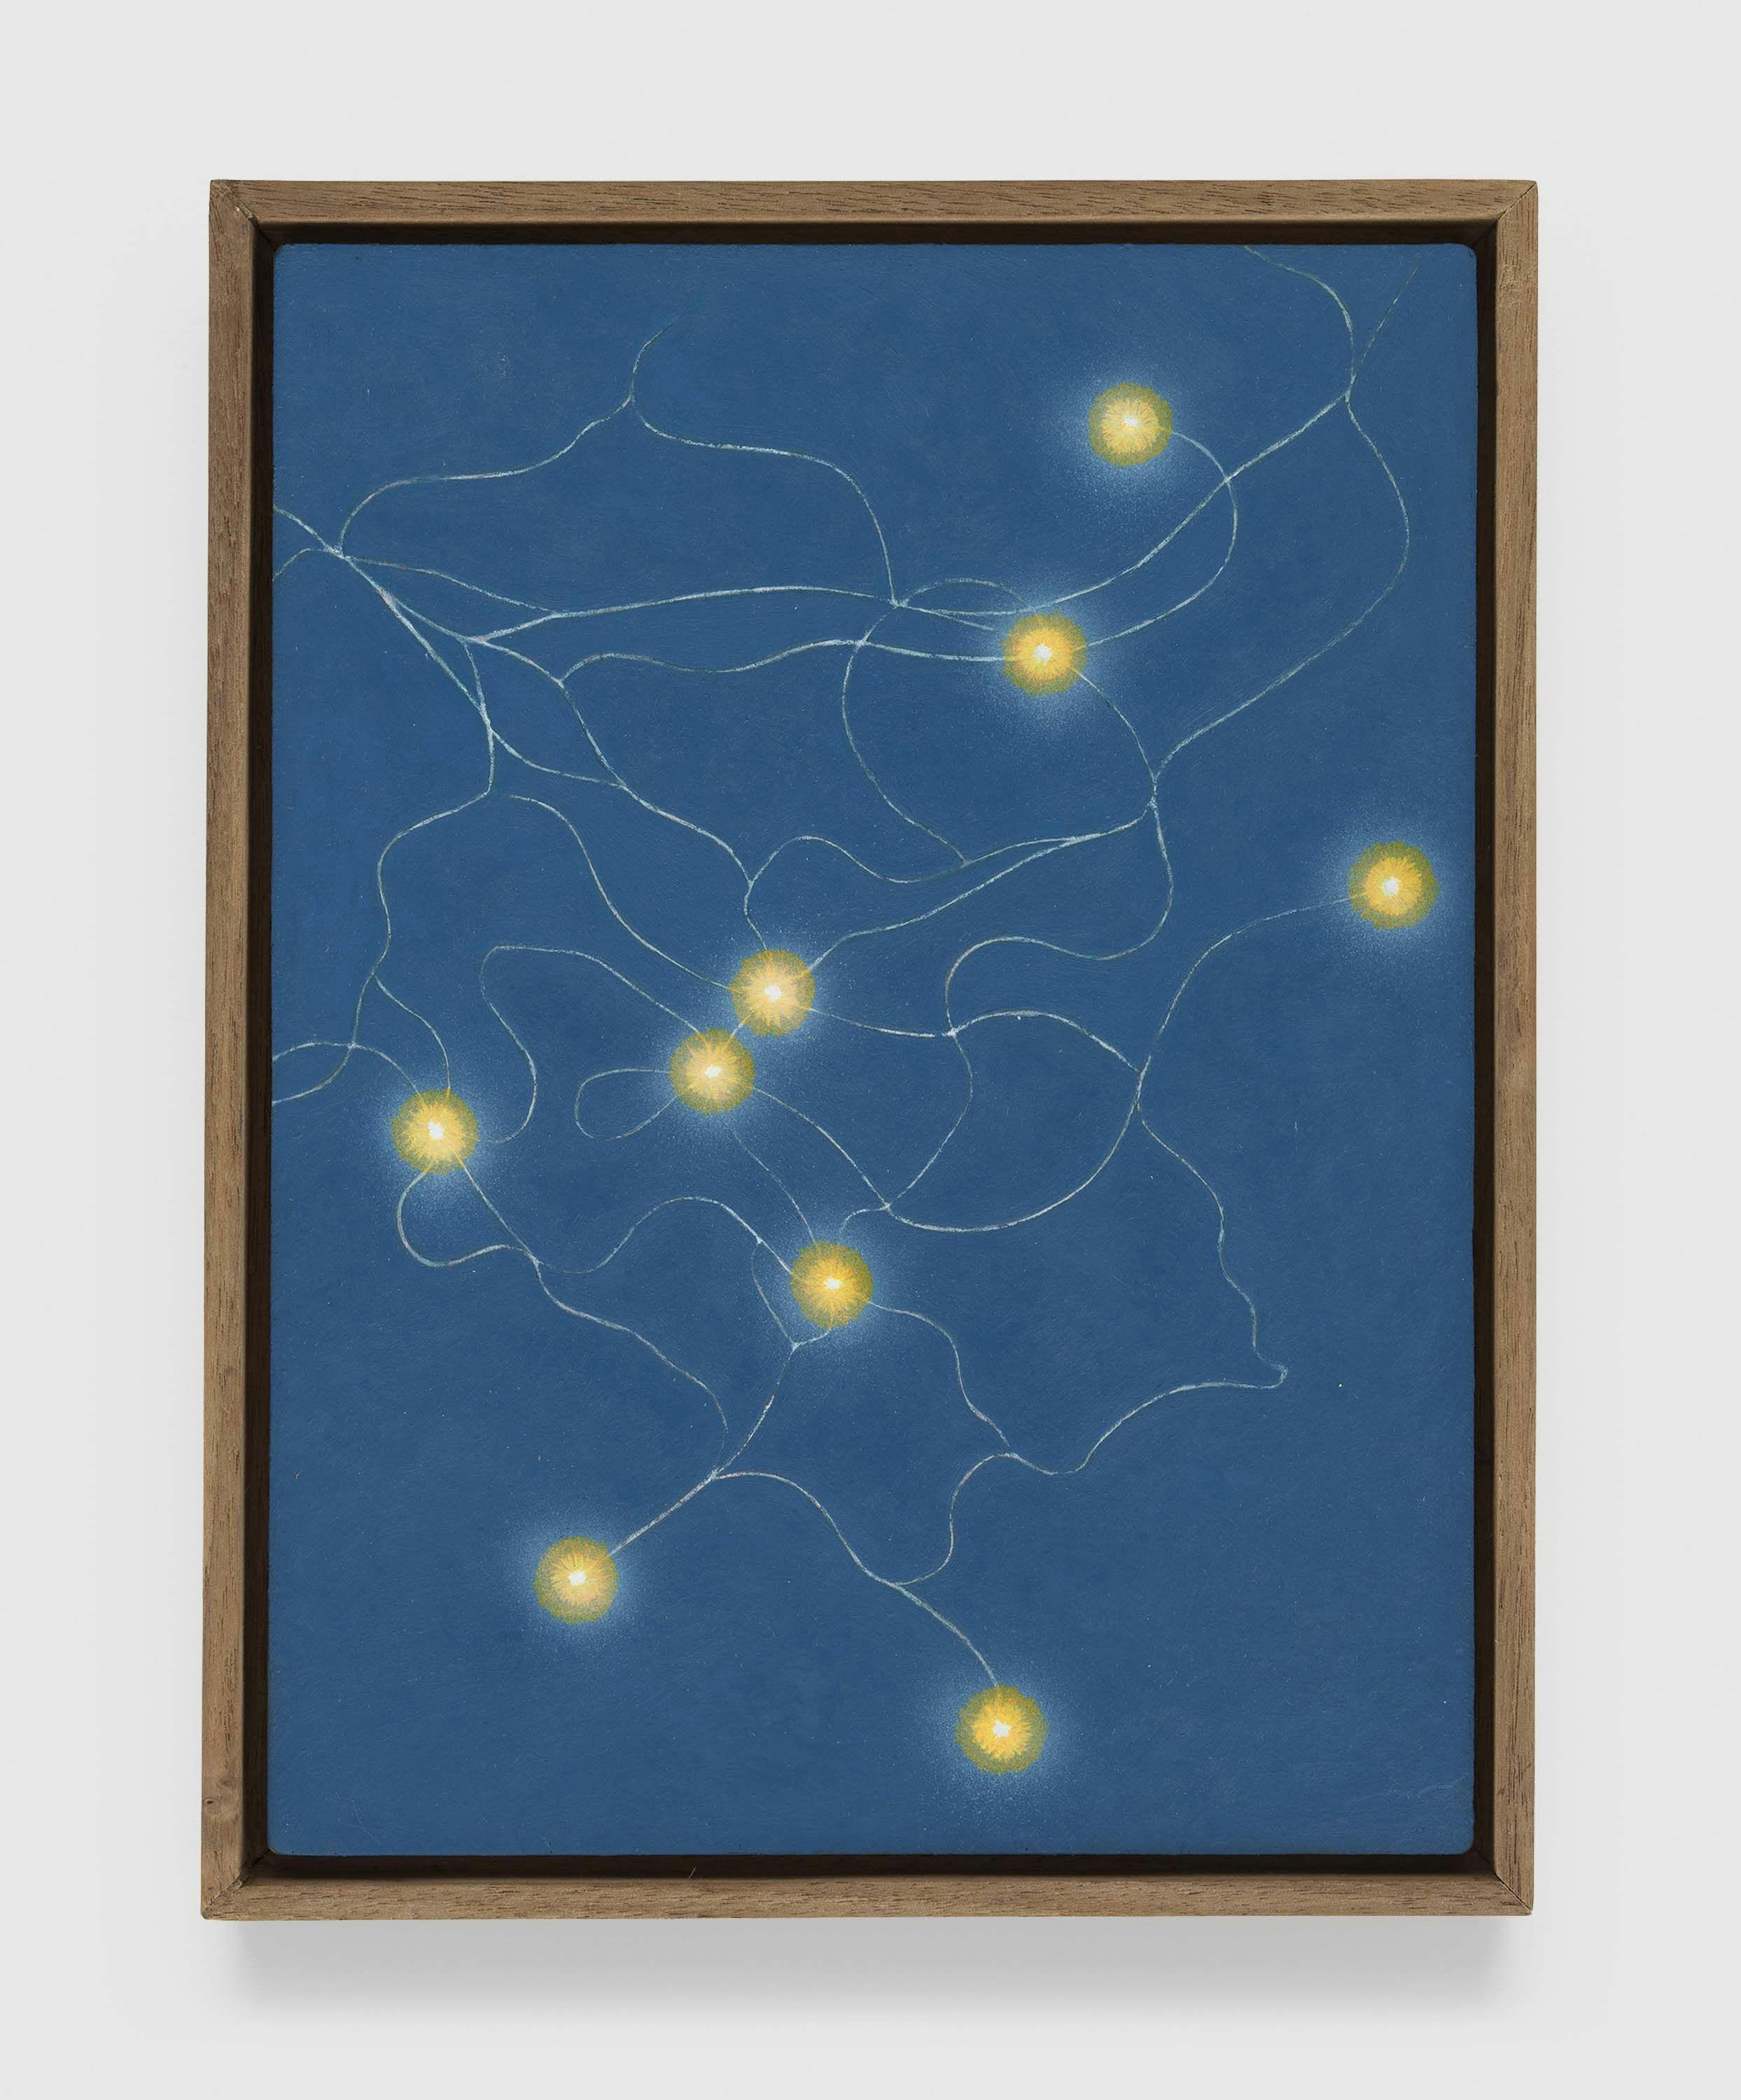 A painting by Francis Alÿs, titled Afghan Night 3, dated 2013.